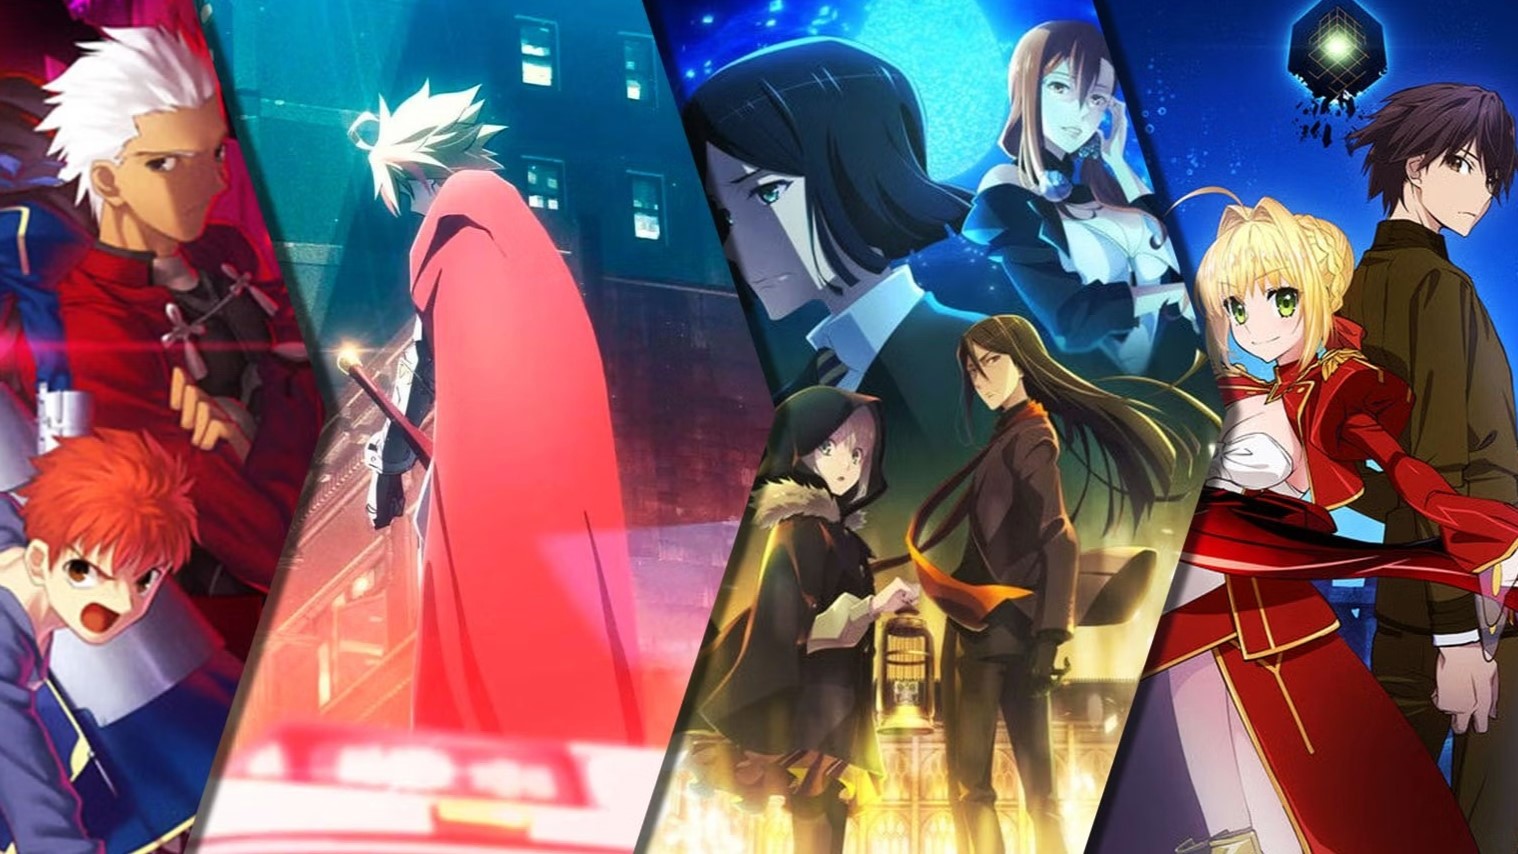 The Ultimate Guide To Watching The Fate Anime Series In The Perfect Order